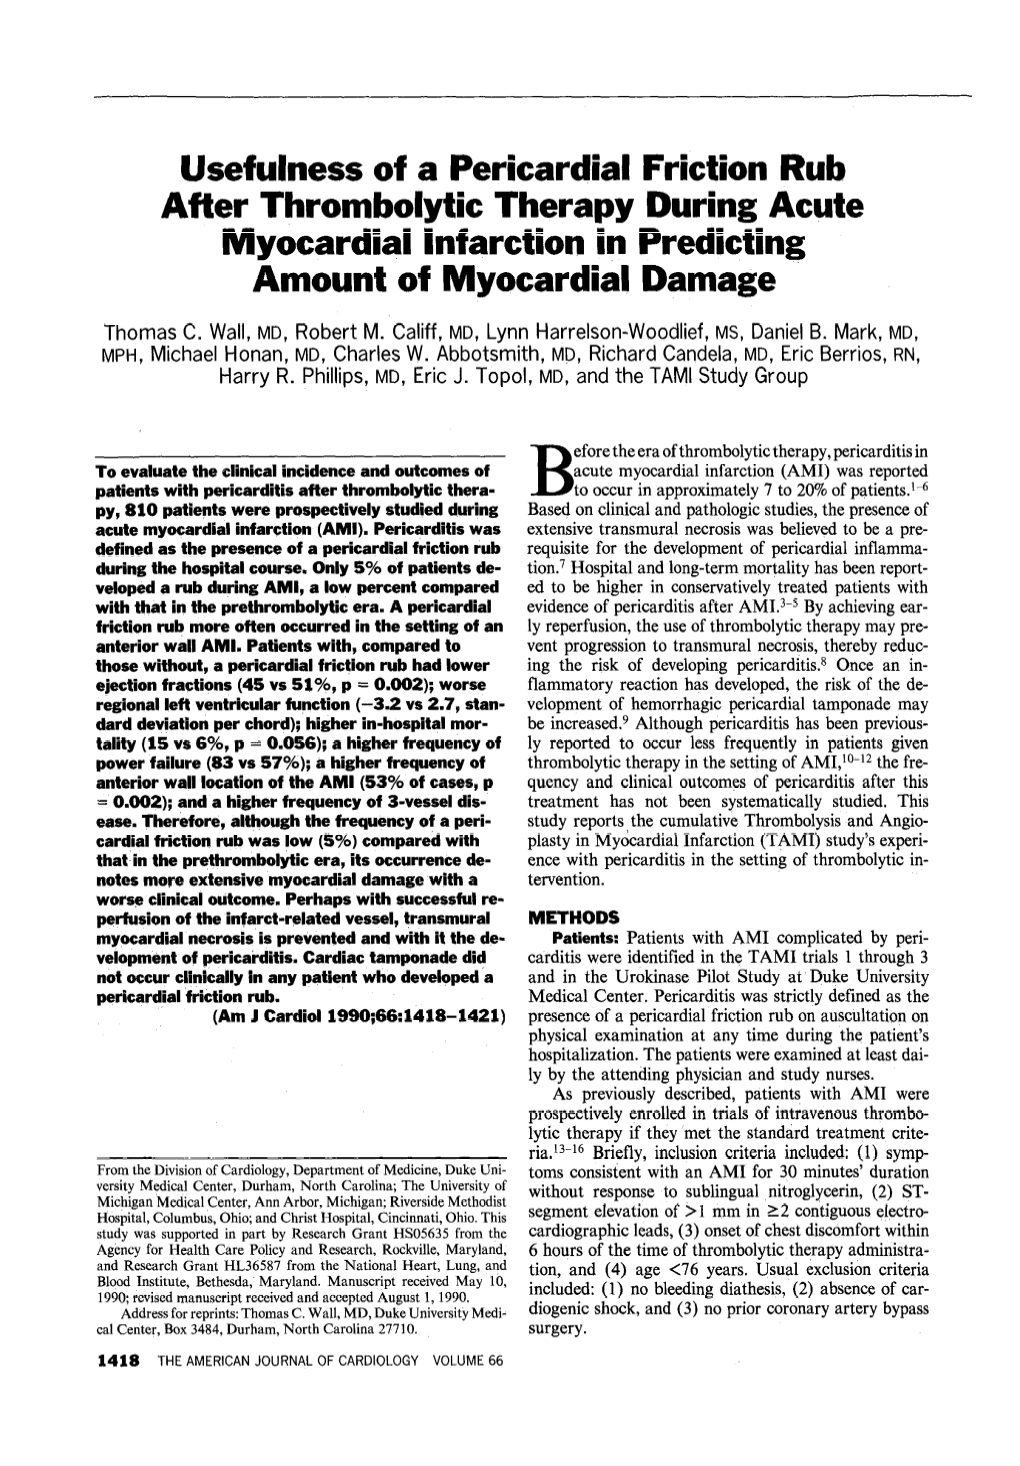 Usefulness of a Pericardial Friction Rub After Thrombolytic Therapy During Acute Myocardial Infarction in Predicting Amount of Myocardial Damage